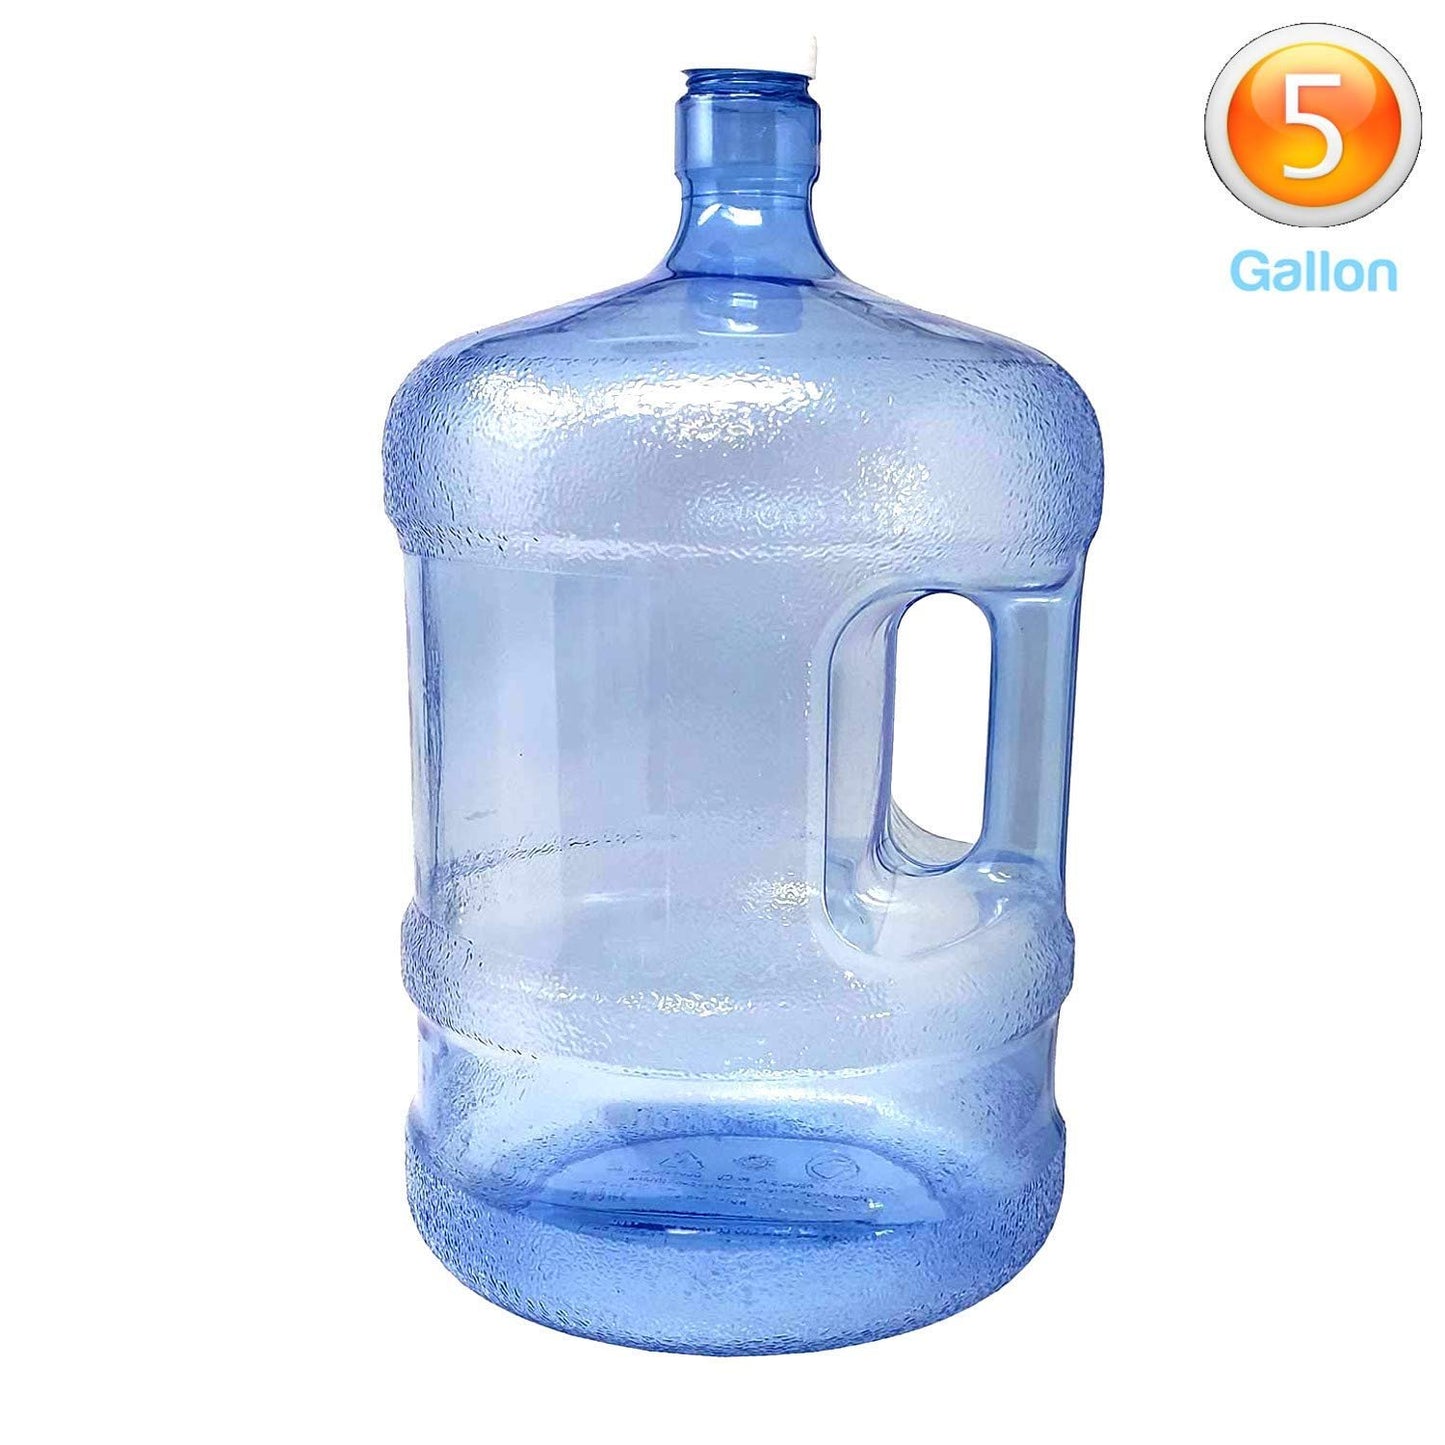 5 GAL Blue Plastic Jug / Water Container with White Cap